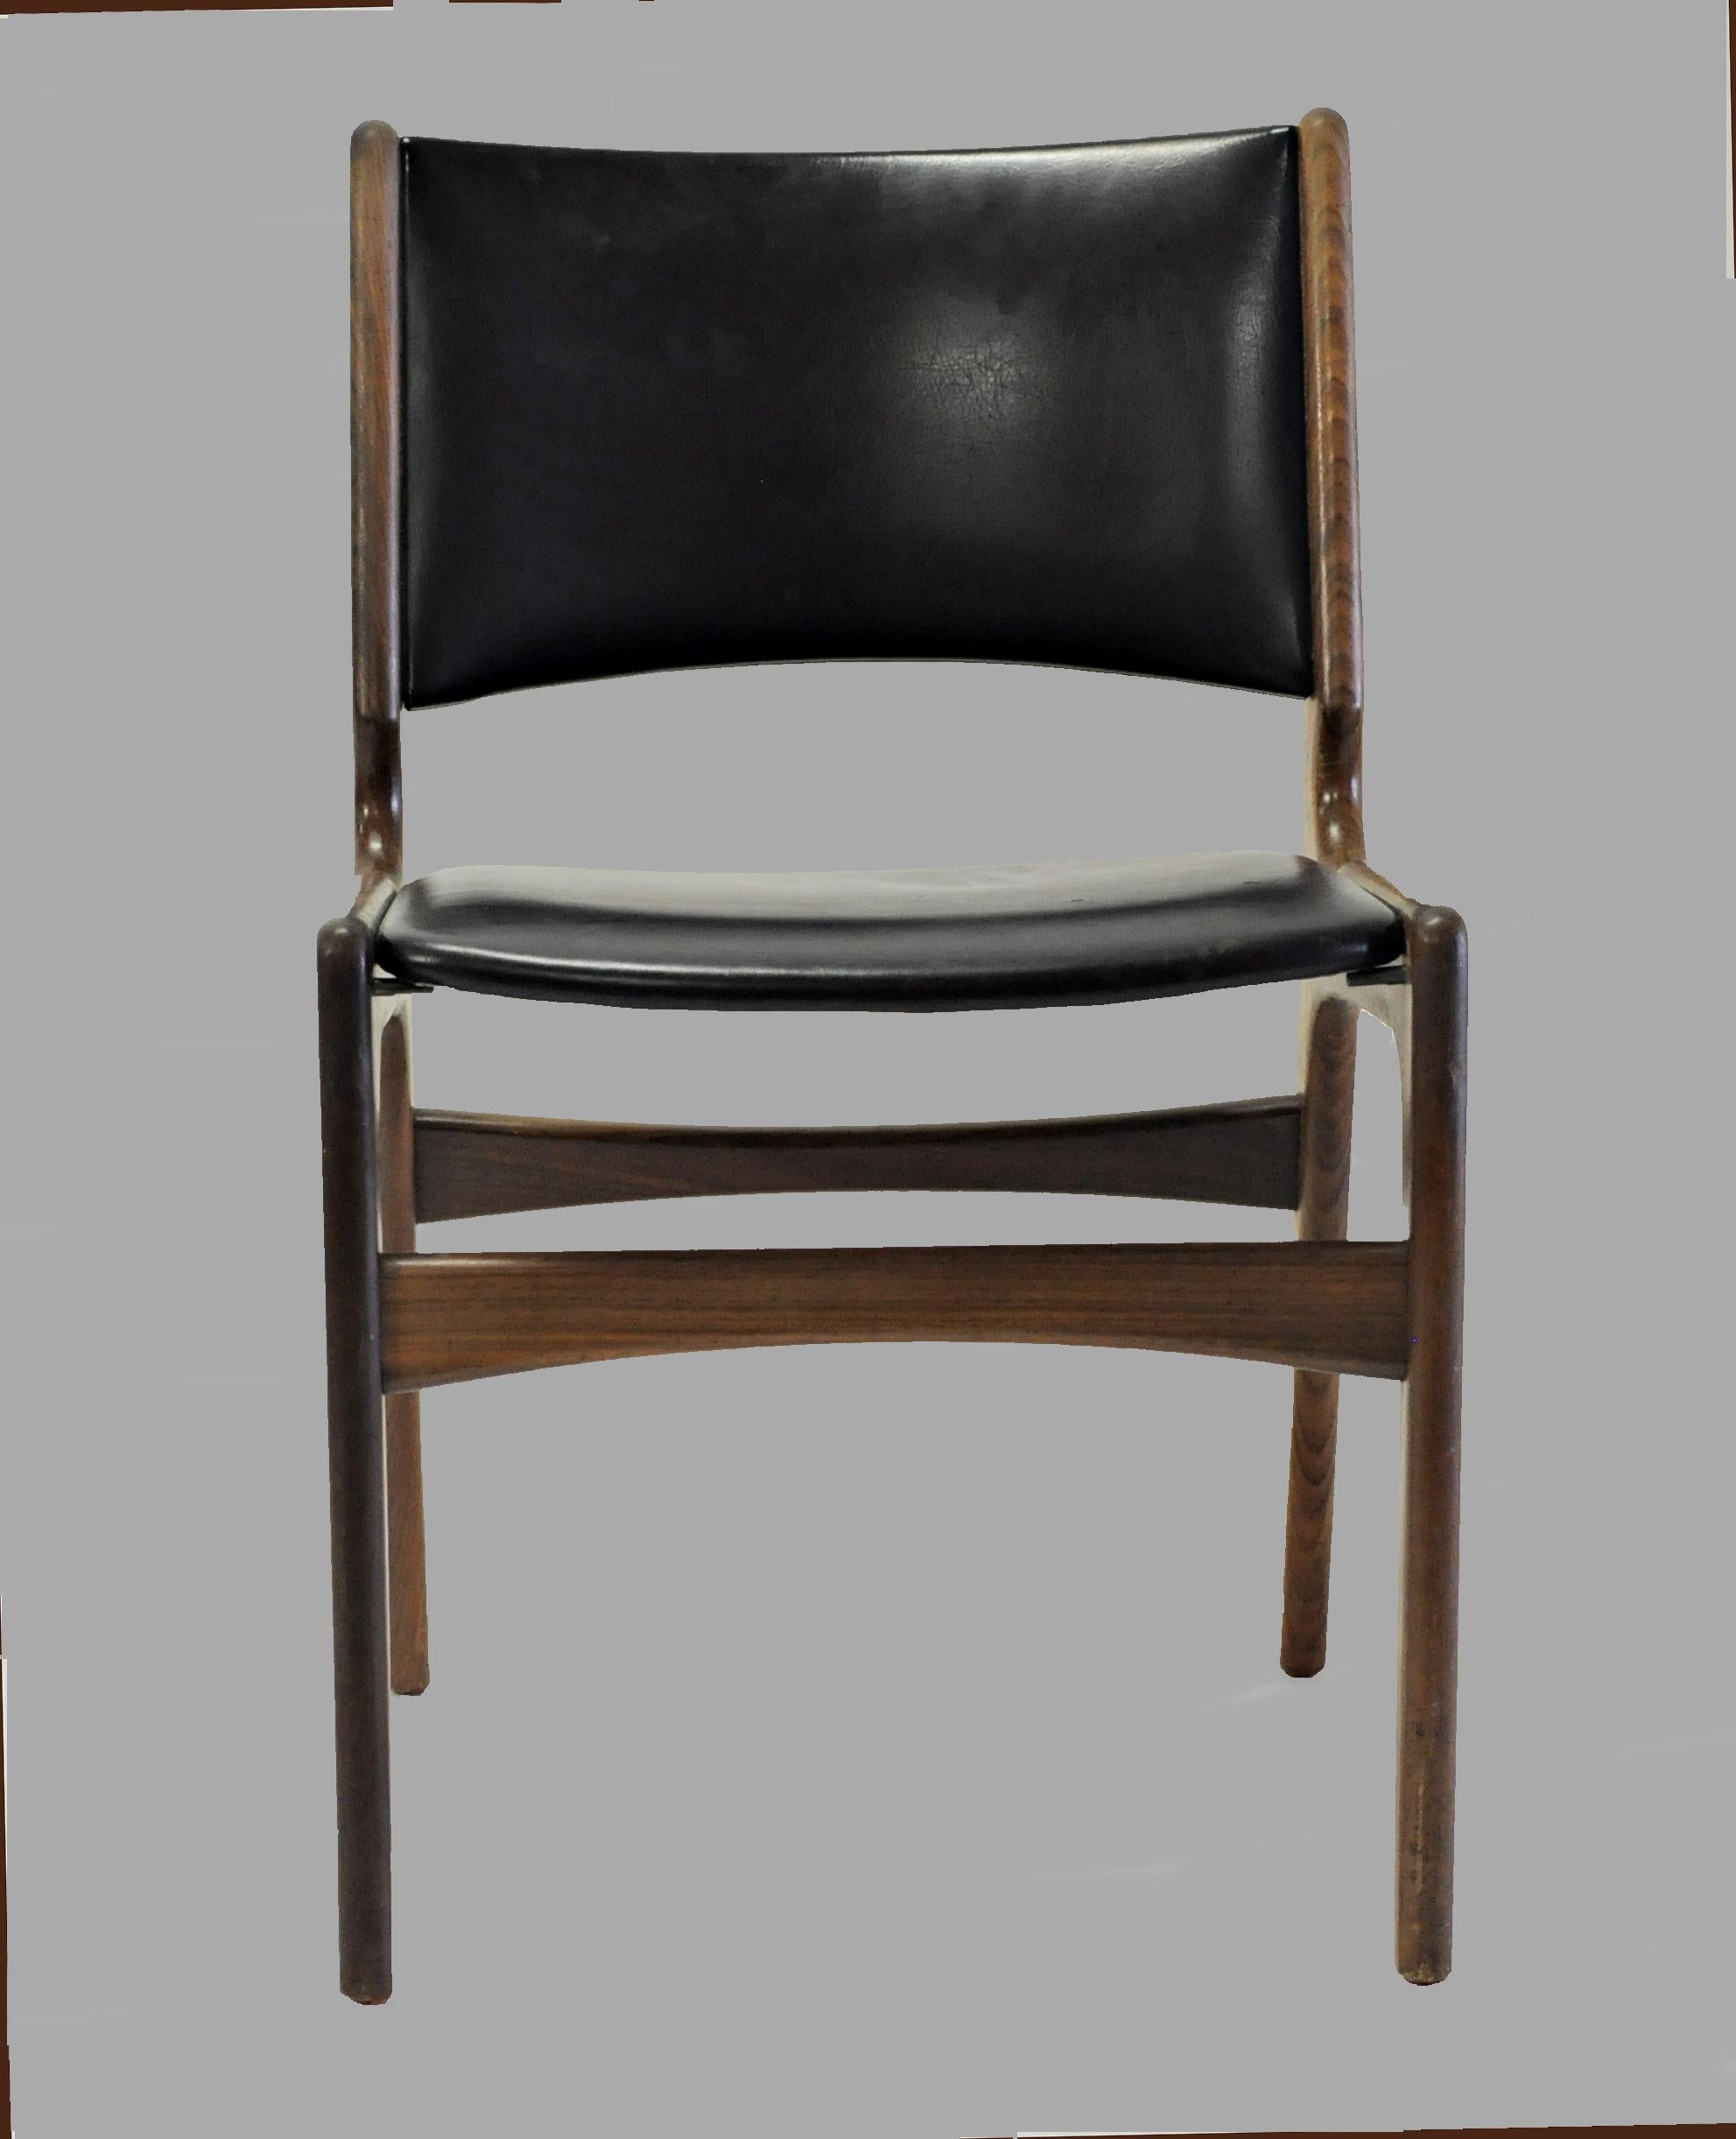 Six Erik Buch Refinished dining chairs in solid teak, custom upholstery

The chairs feature a solid teak frame and are as all of Erik Buchs chairs characterized by high-quality materials, solid craftsmanship, Scandinavian aesthetic and not least a